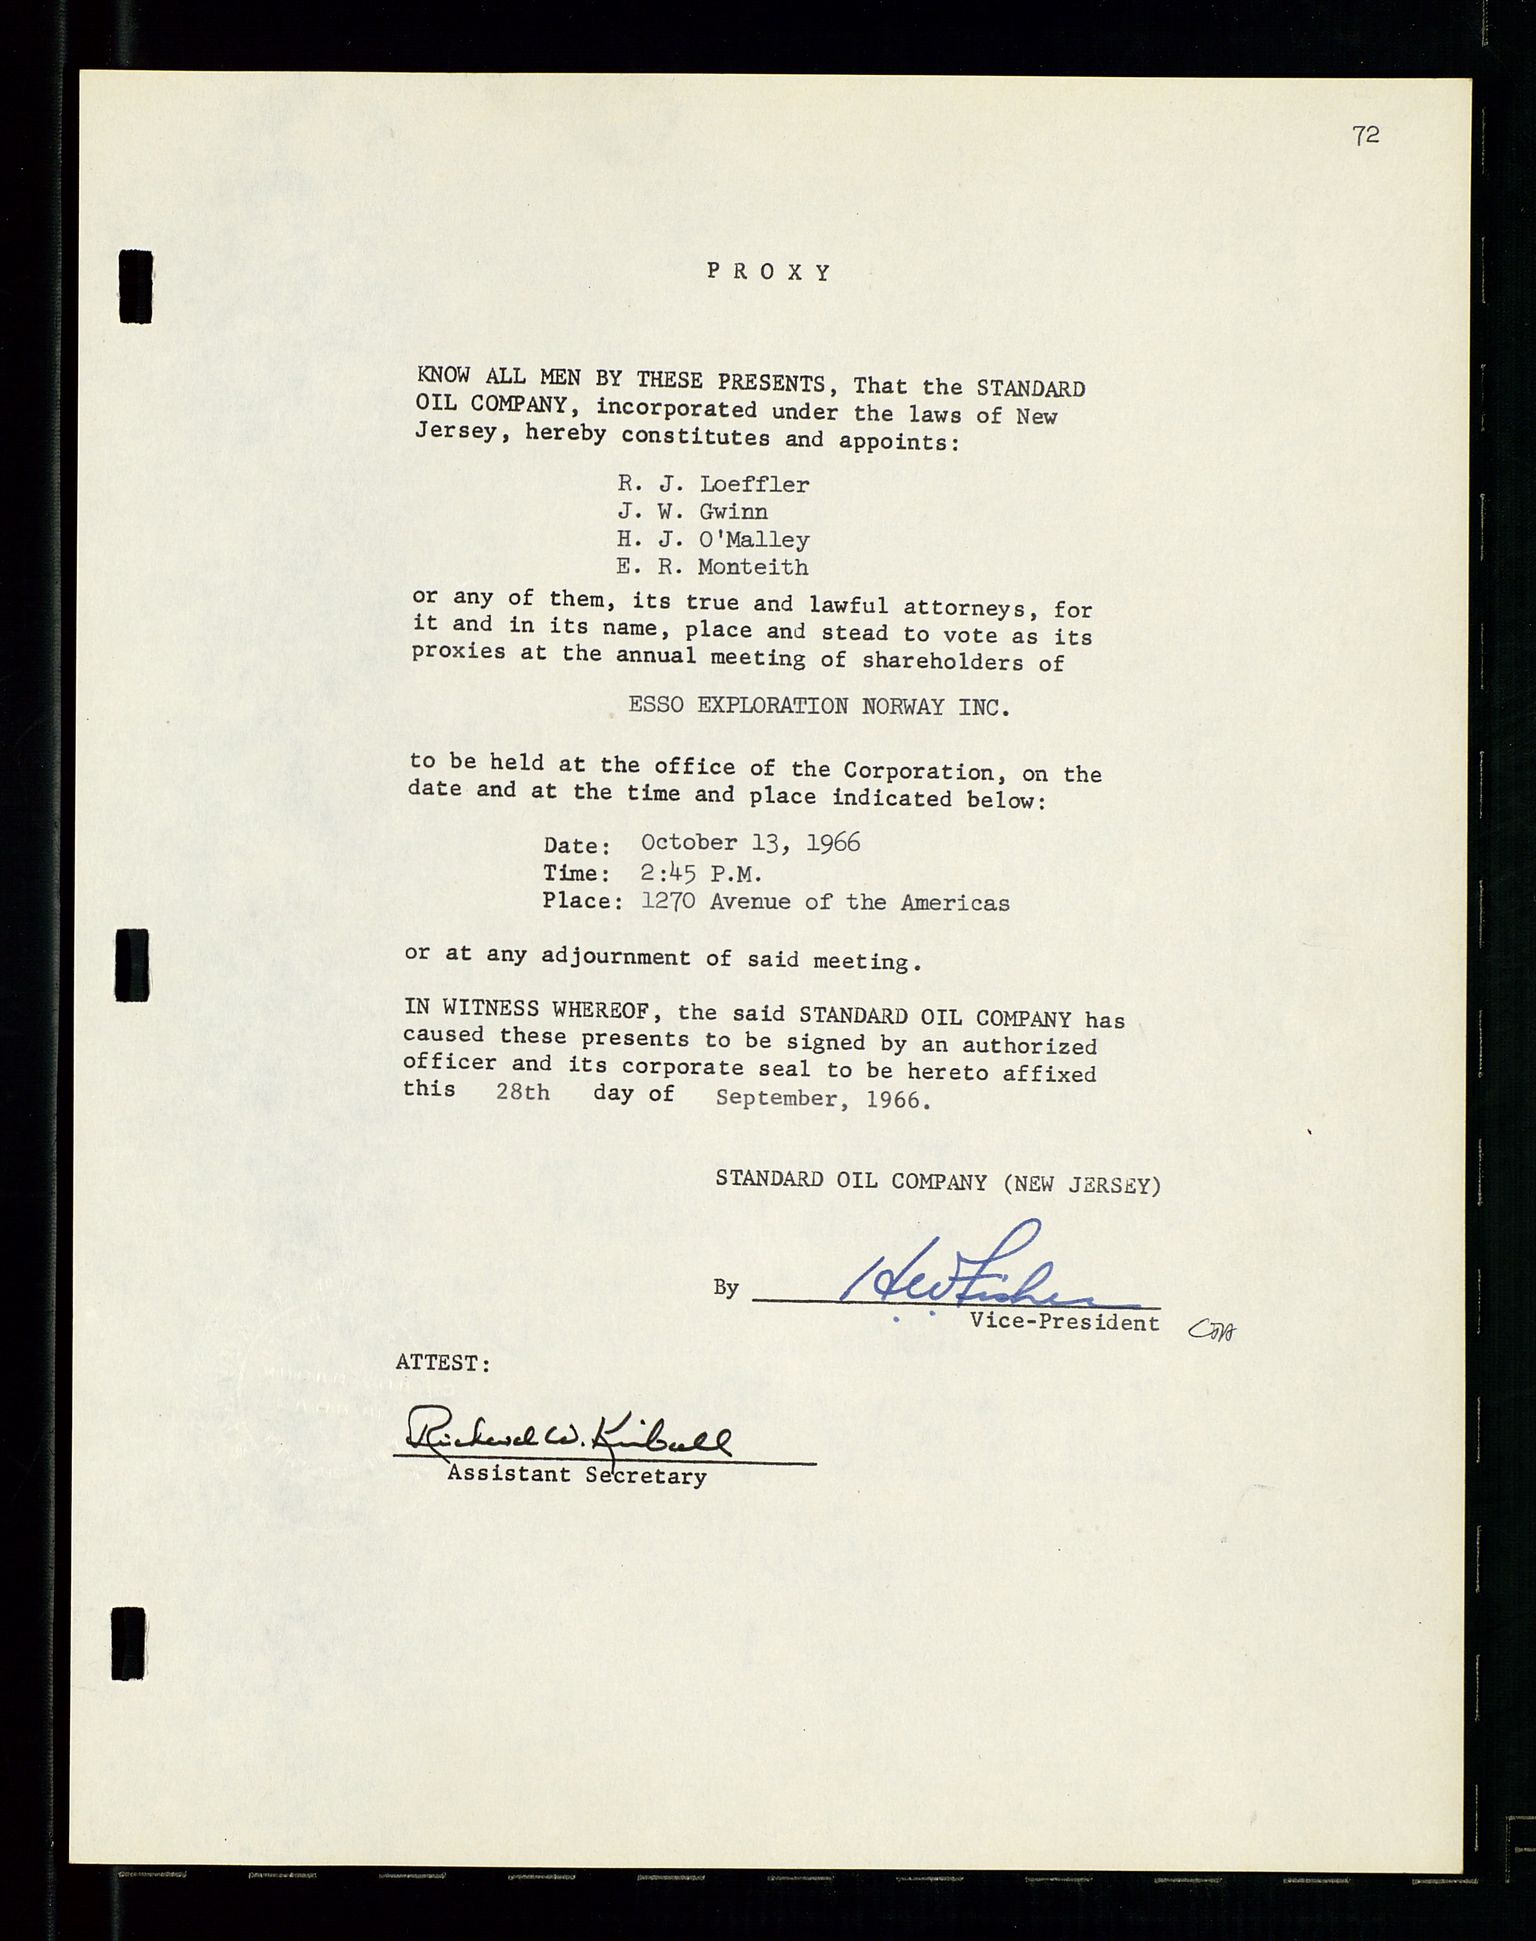 Pa 1512 - Esso Exploration and Production Norway Inc., SAST/A-101917/A/Aa/L0001/0001: Styredokumenter / Corporate records, By-Laws, Board meeting minutes, Incorporations, 1965-1975, s. 72